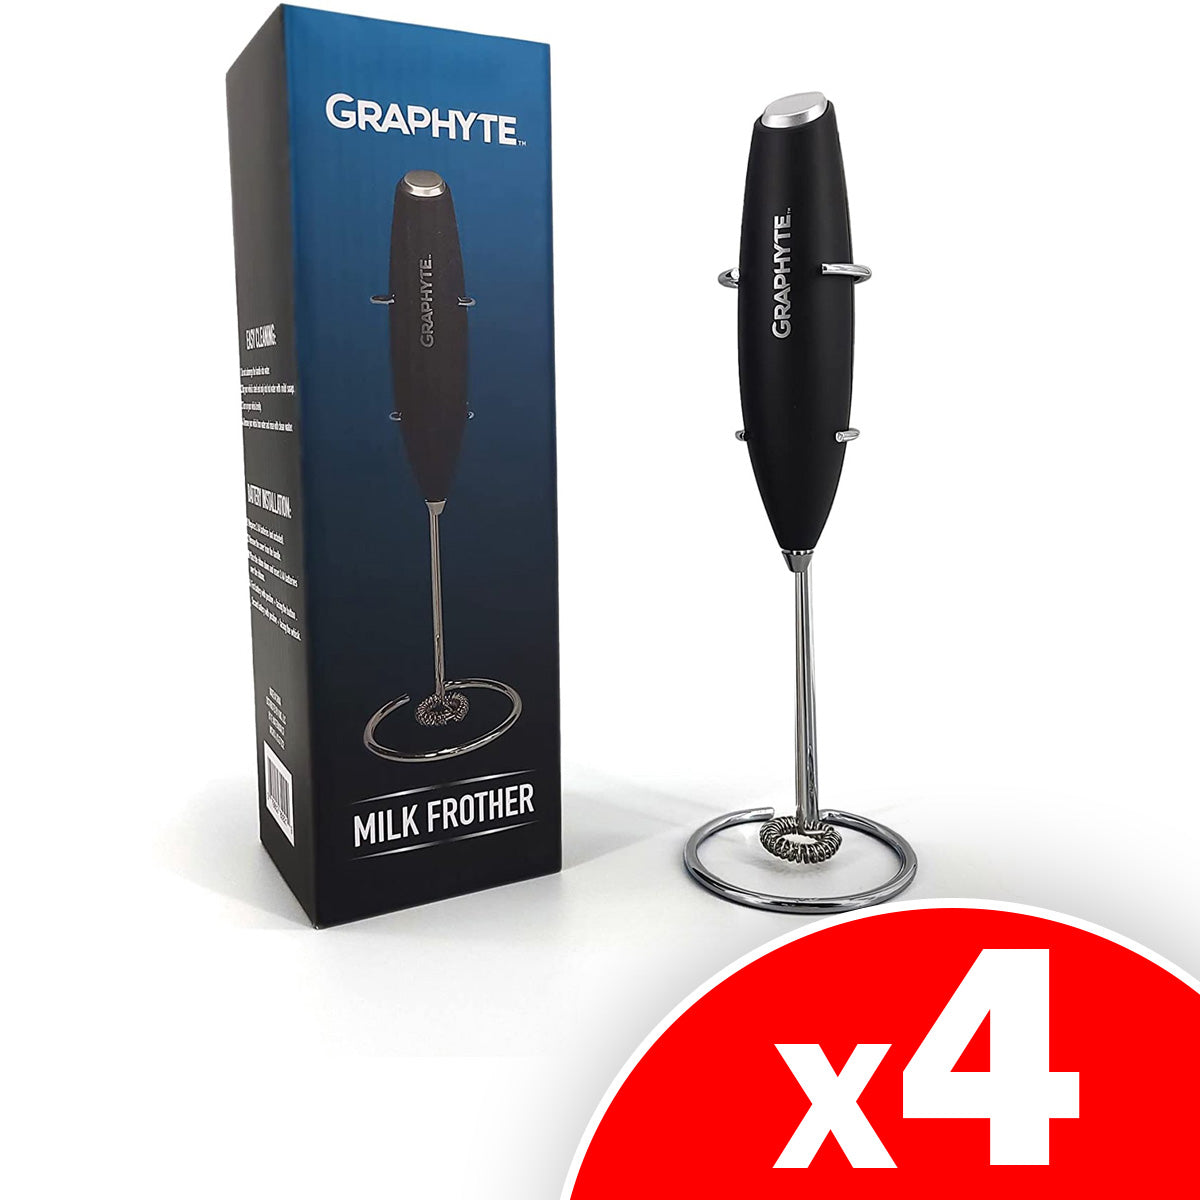 Graphyte Handheld Milk Frother for Lattes, Coffee & More, 4 Pack